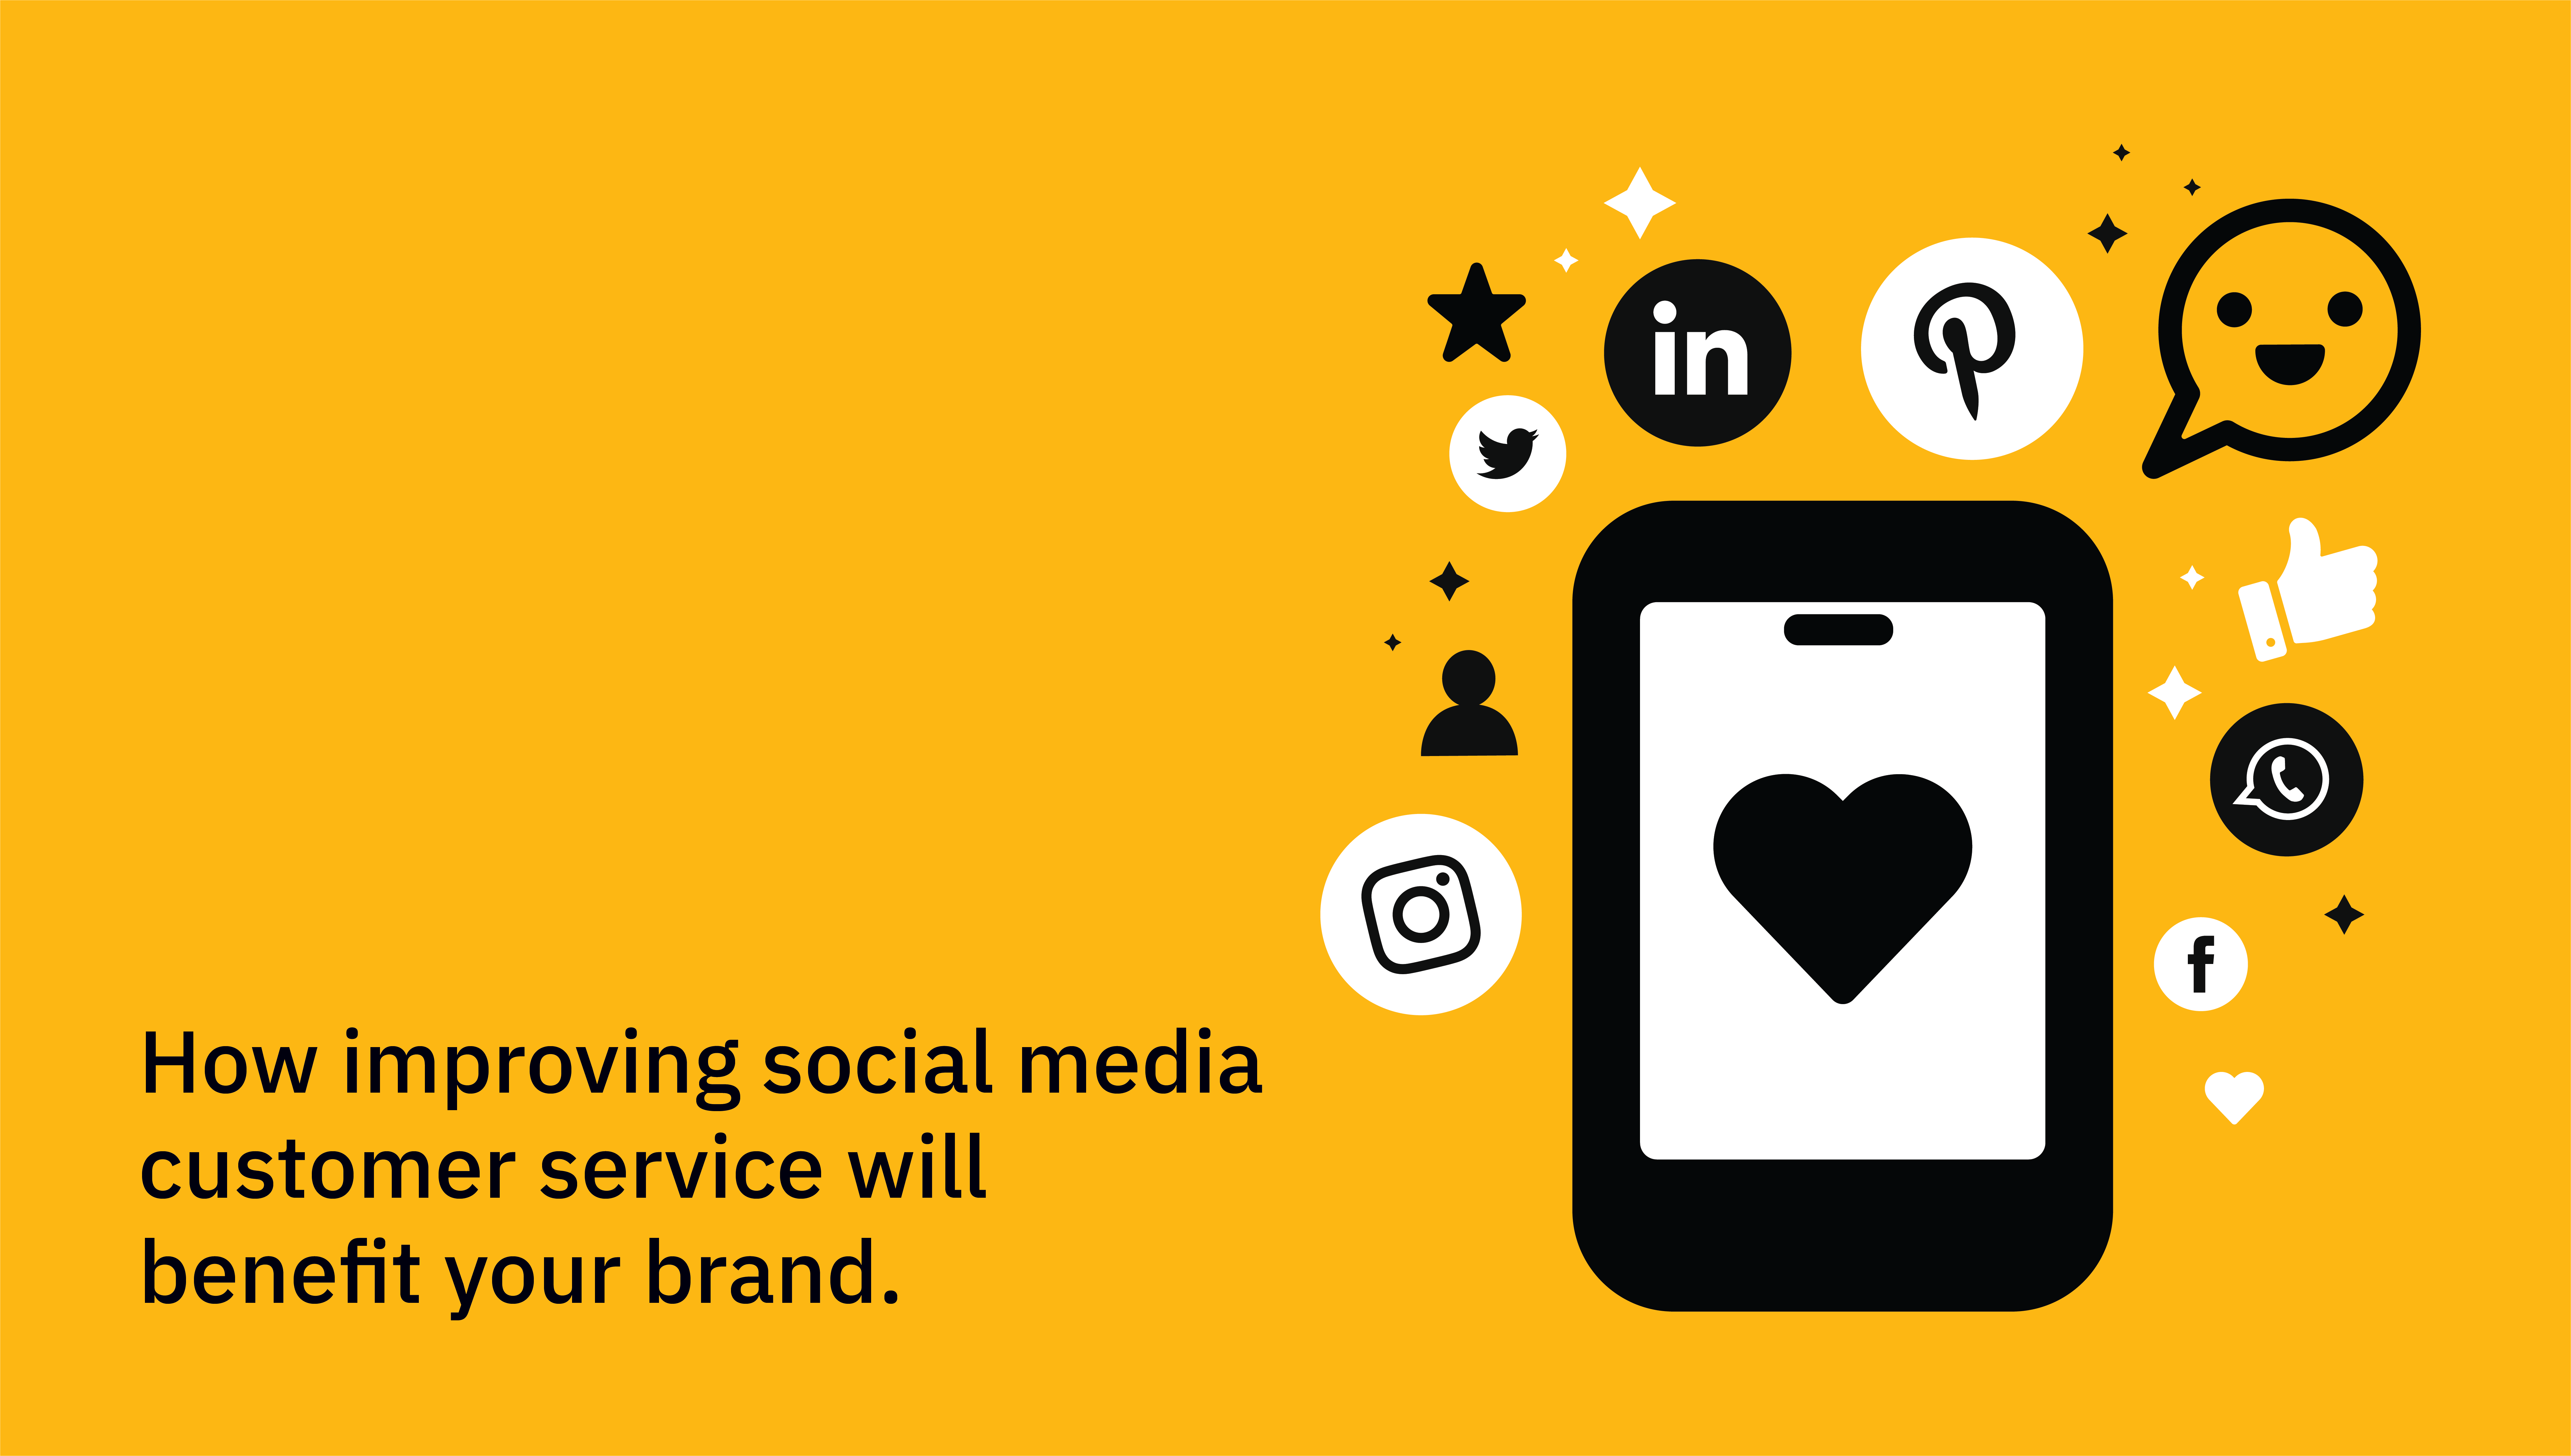 How to improving social media customer service will benefit your brand.